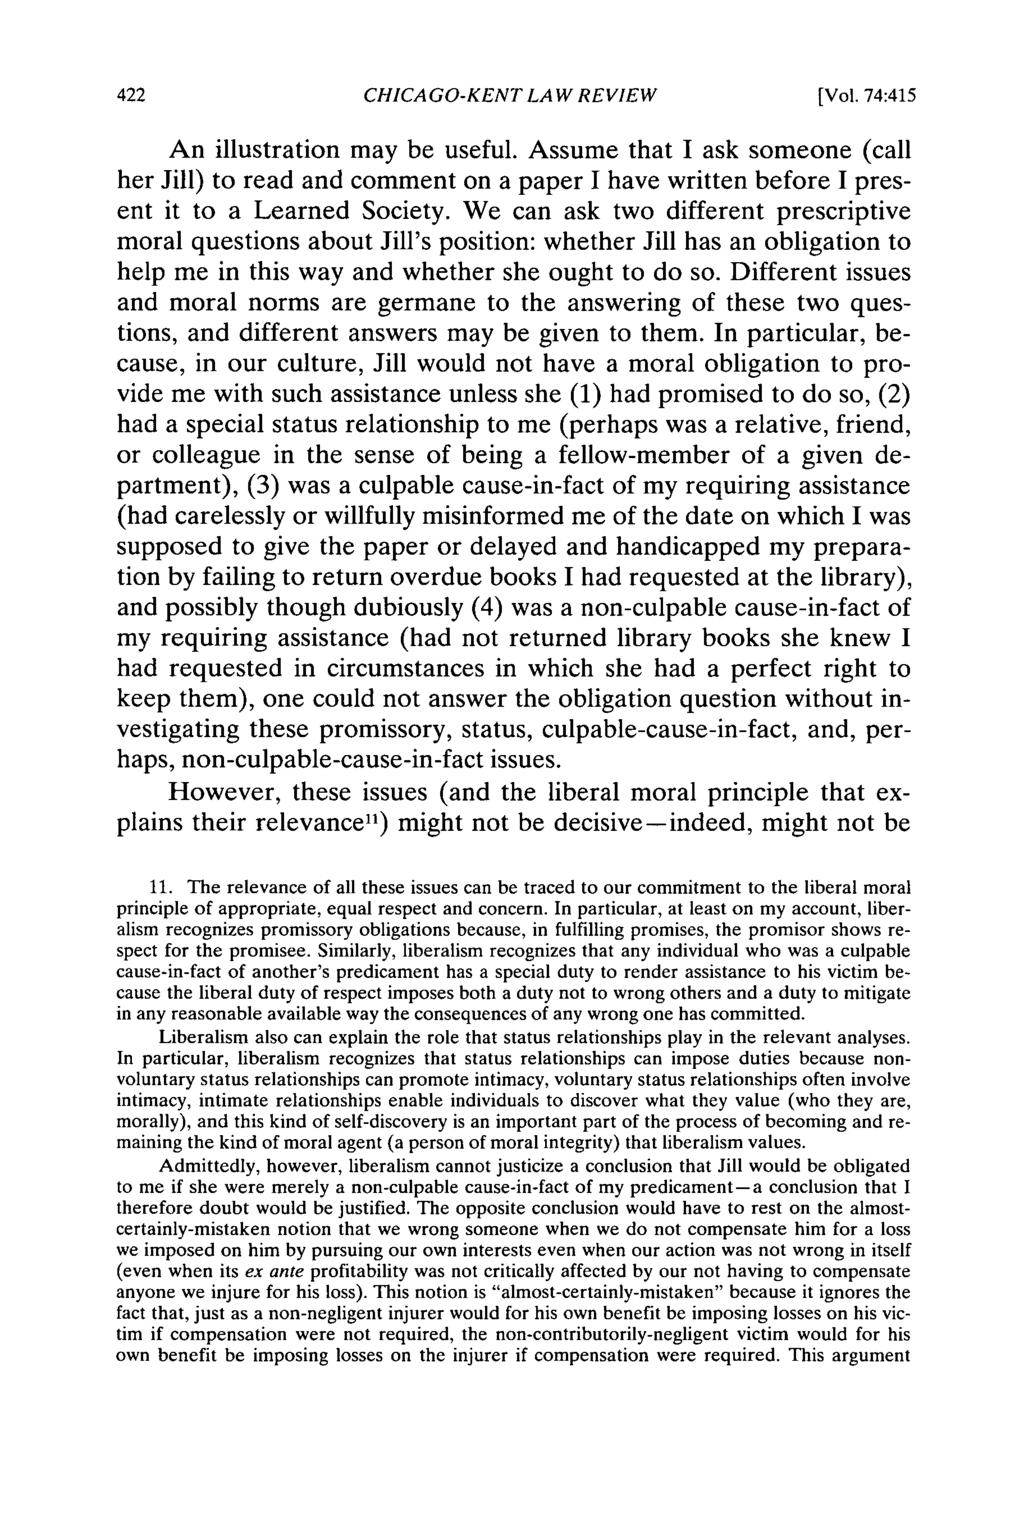 CHICAGO-KENT LAW REVIEW [Vol. 74:415 An illustration may be useful. Assume that I ask someone (call her Jill) to read and comment on a paper I have written before I present it to a Learned Society.